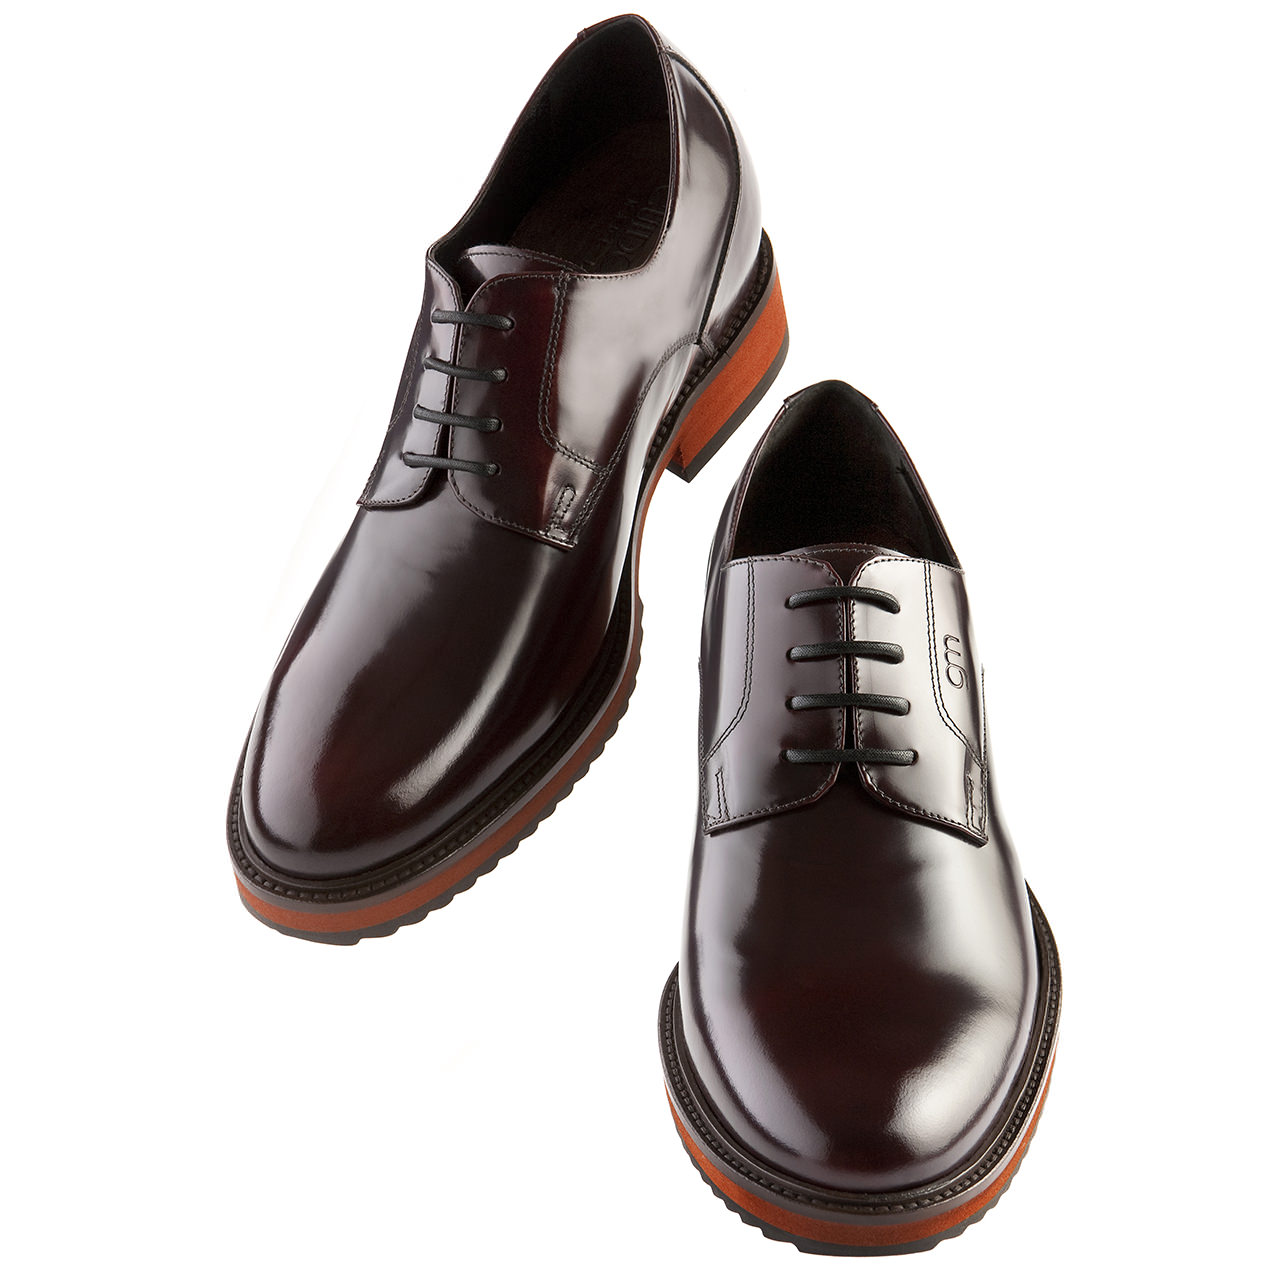 Vienna - tall men shoes | Guidomaggi luxury elevator shoes